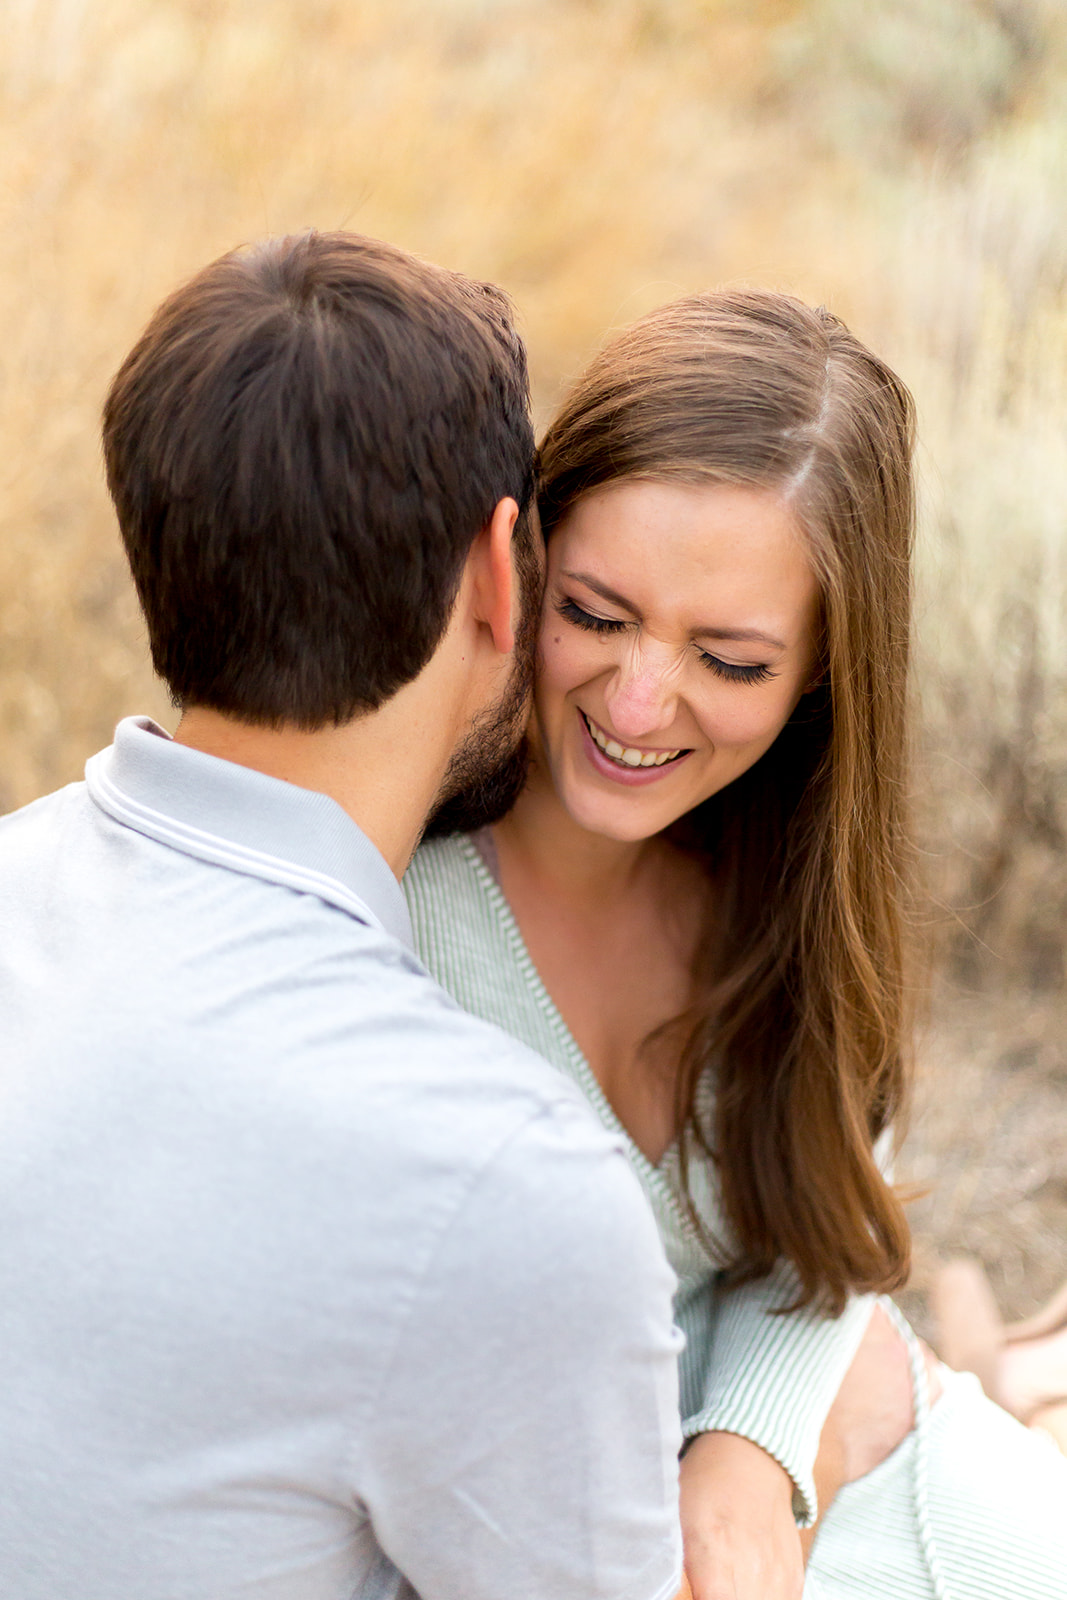 Man in a blue shirt whispers into his fiance's ear as she smiles and laughs captured by their engagement photographer